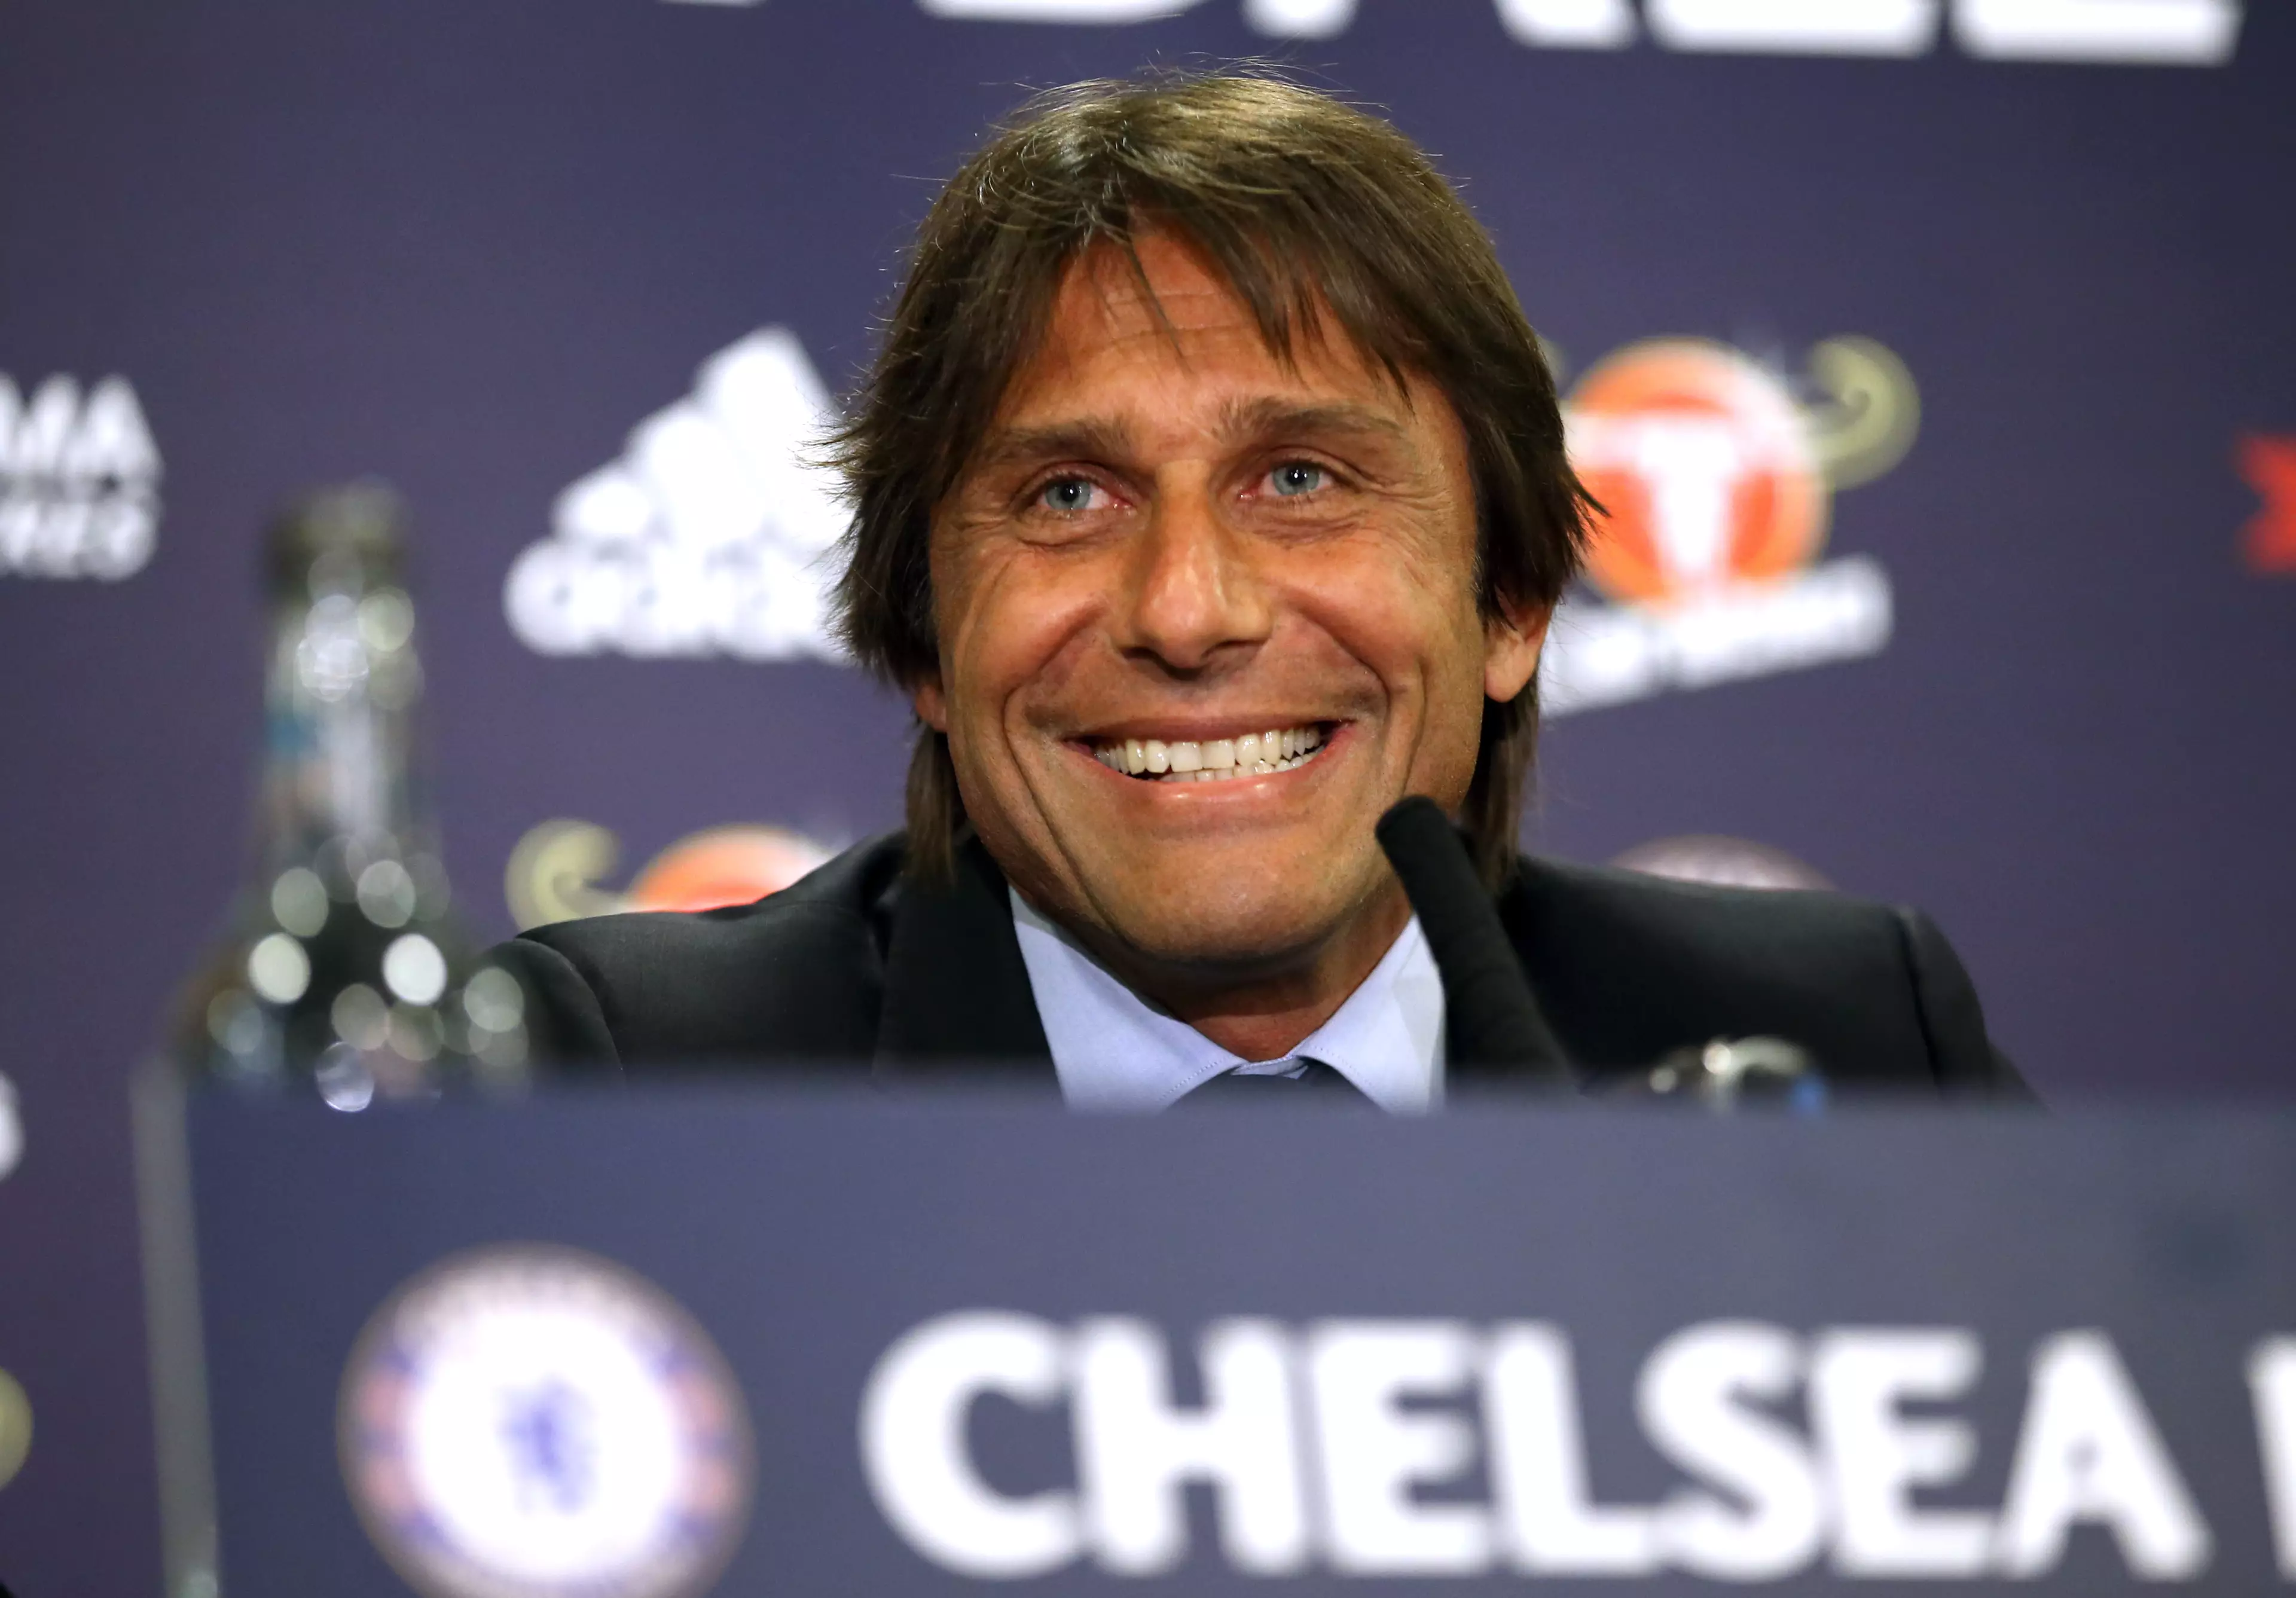 TheODDSbible's Chelsea v Hull City Betting Preview